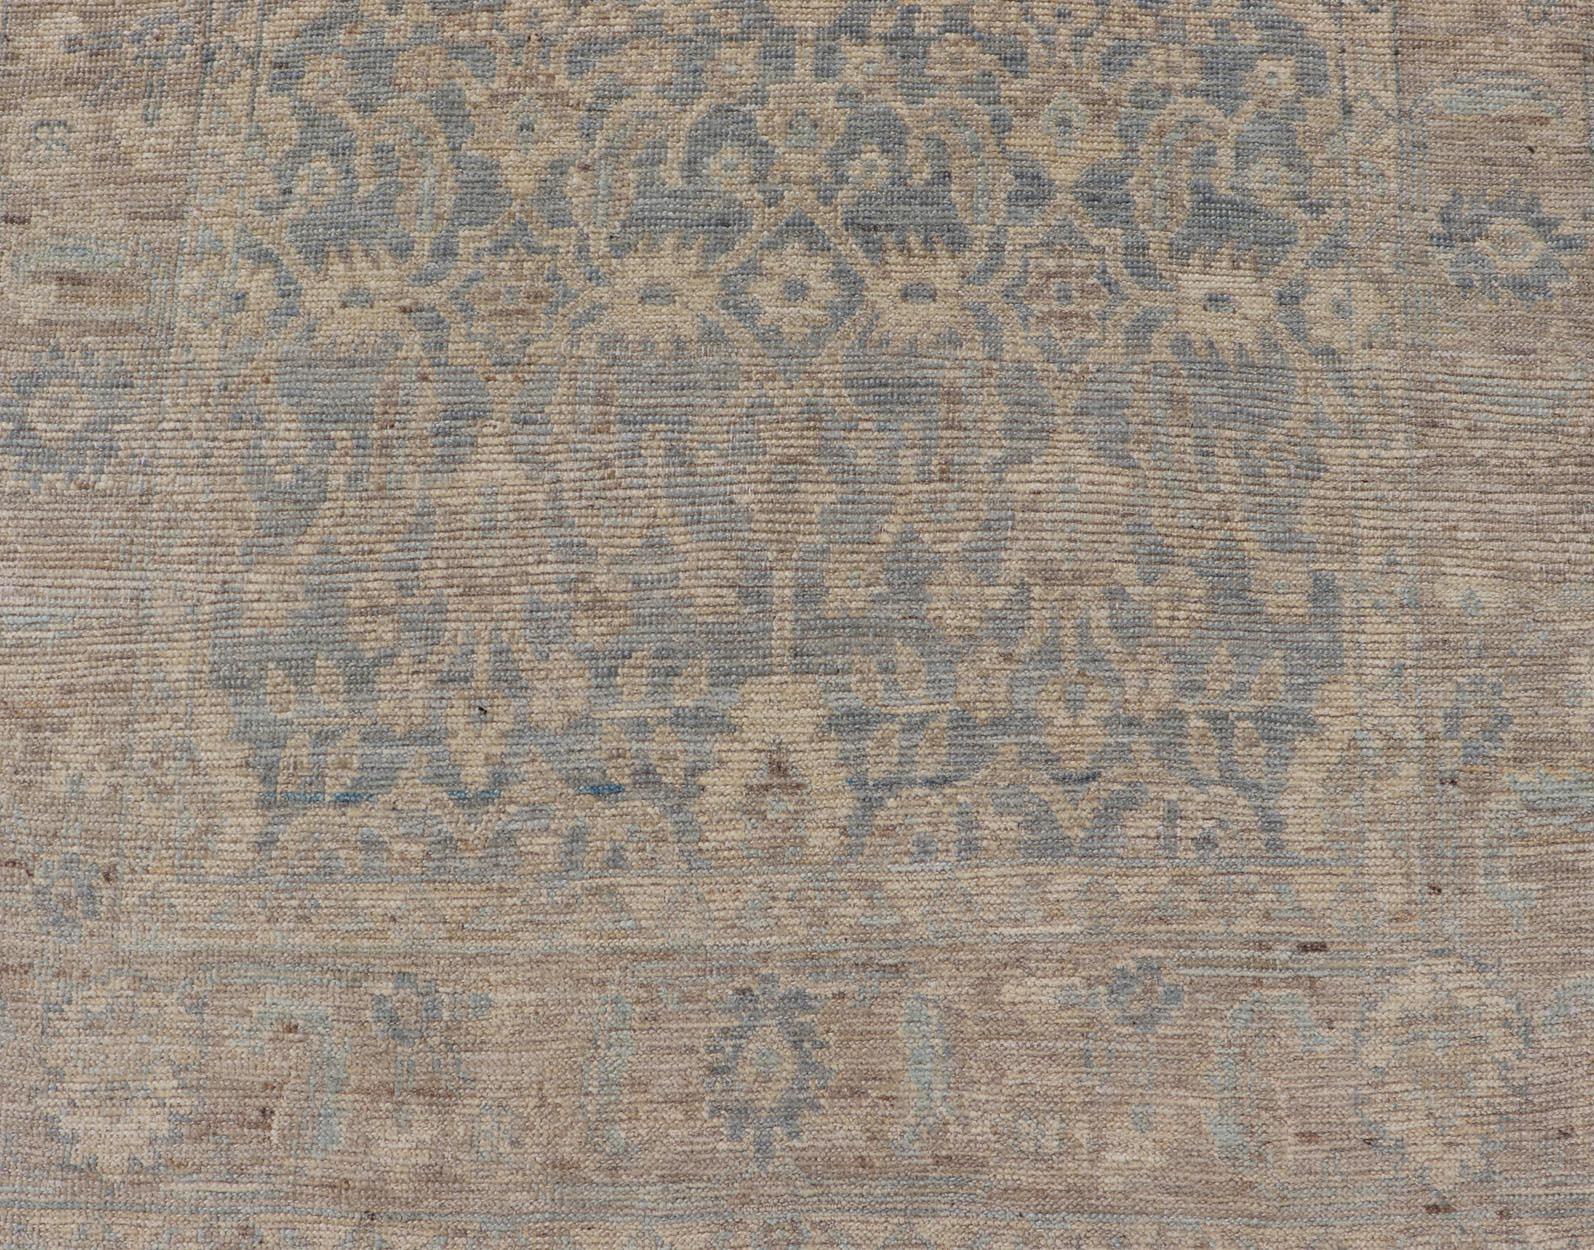 Modern Oushak Rug with a Light Greenish Ground and All-Over Floral Motifs. Keivan Woven Arts; rug AWR-8008 Country of Origin: Afghanistan Type: Oushak Design: All-Over, Floral 

Measures: 3'8 x 5'10 

Hand-Knotted in wool, this rustic looking